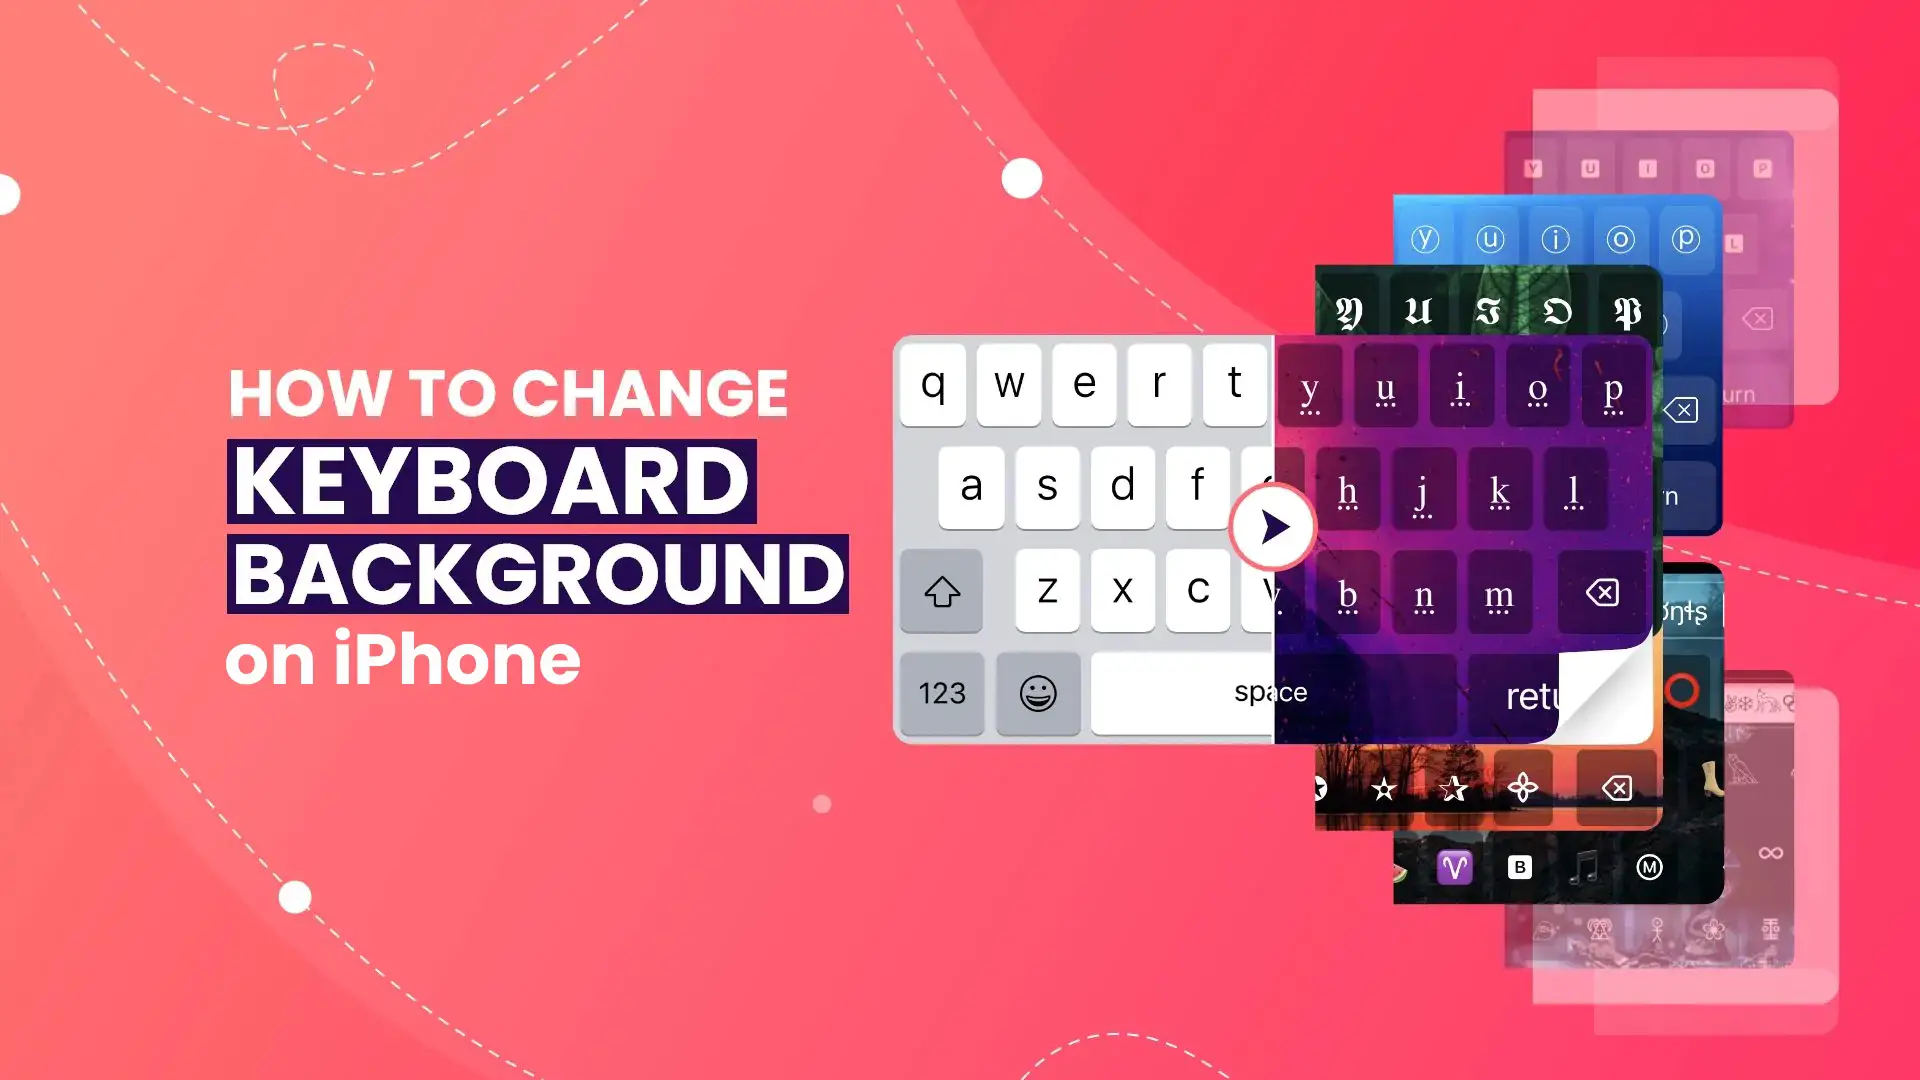 How to change keyboard background on iPhone